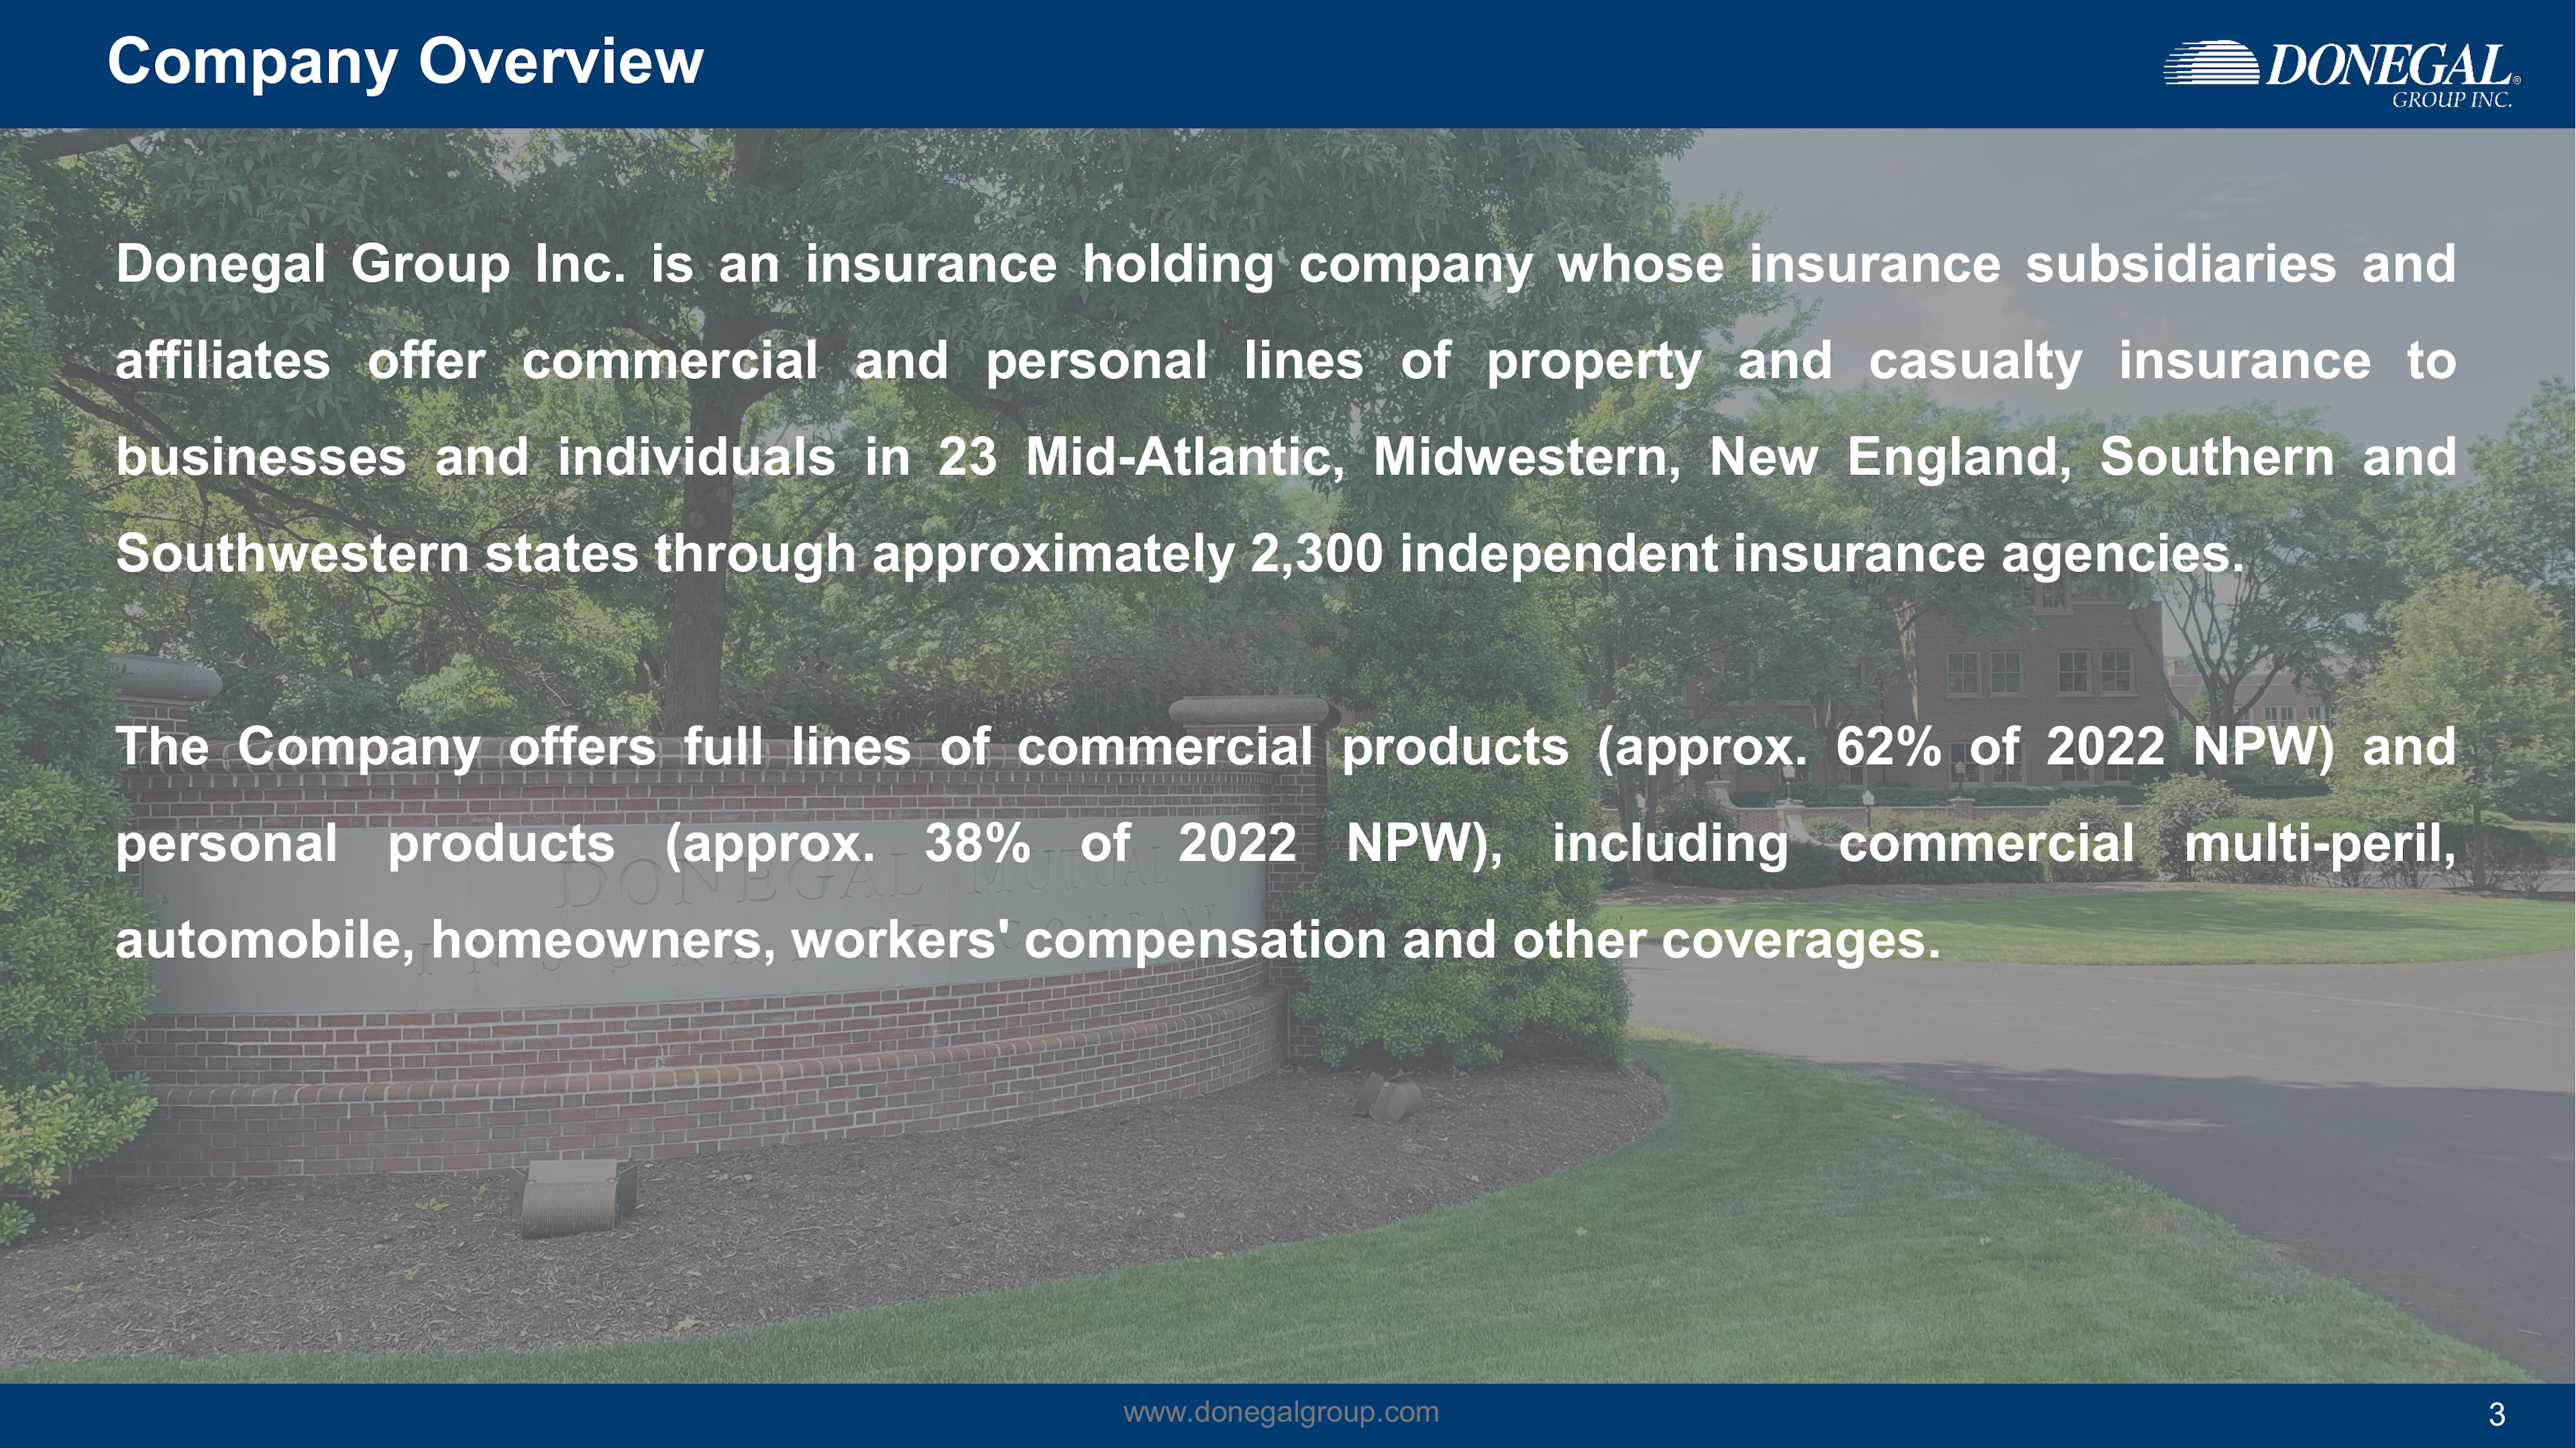 Company Overview 

D